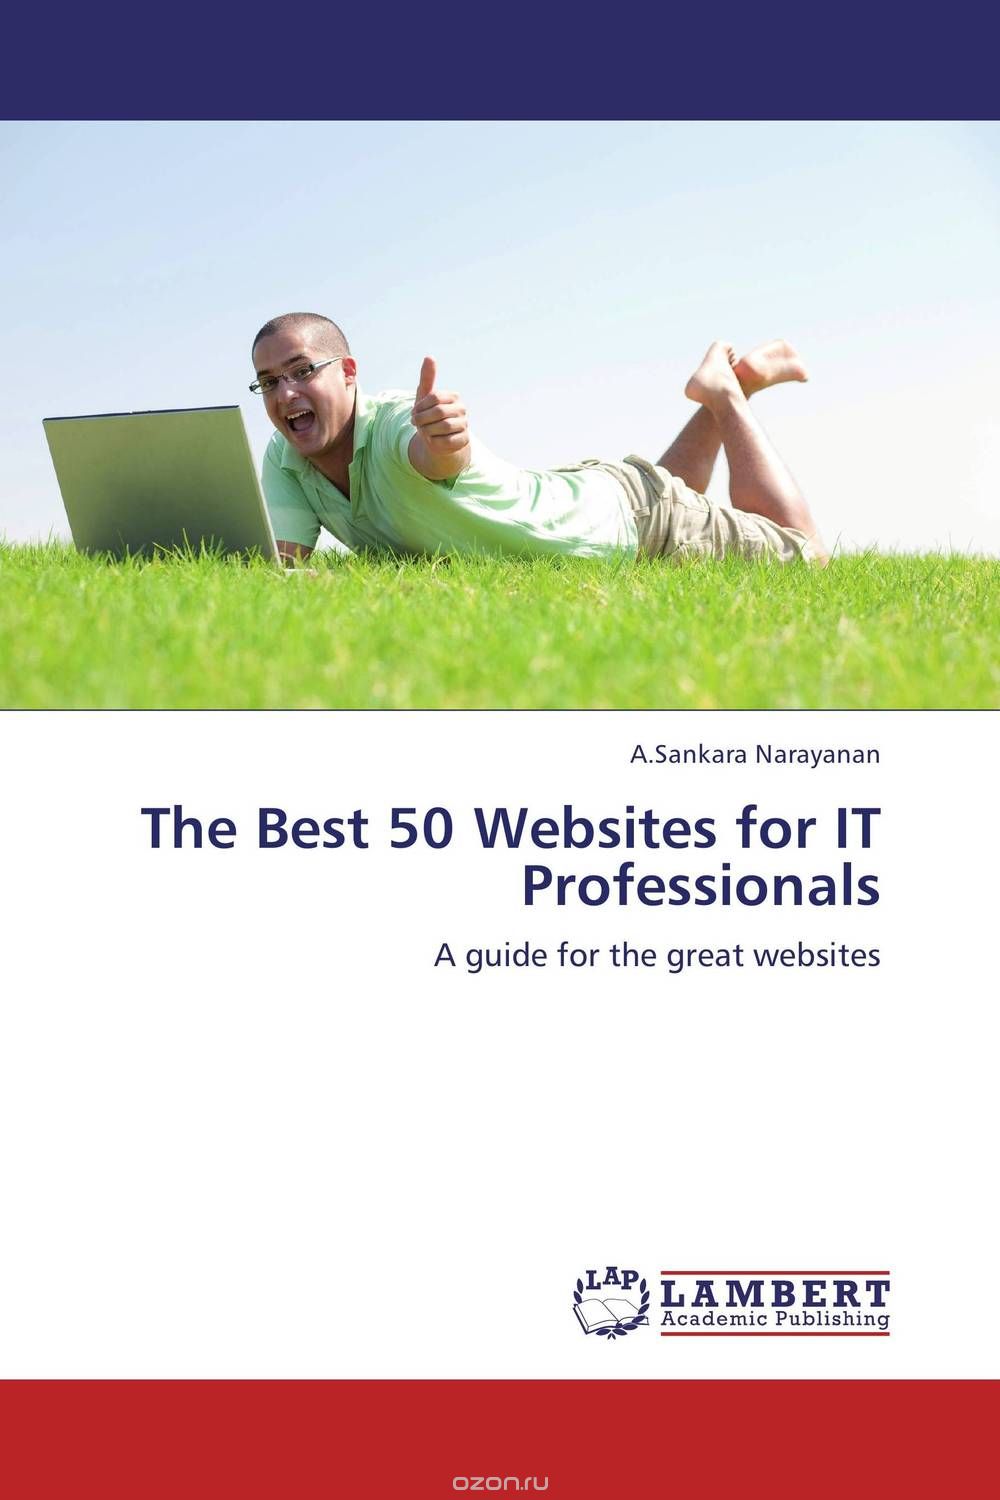 The Best 50 Websites for IT Professionals